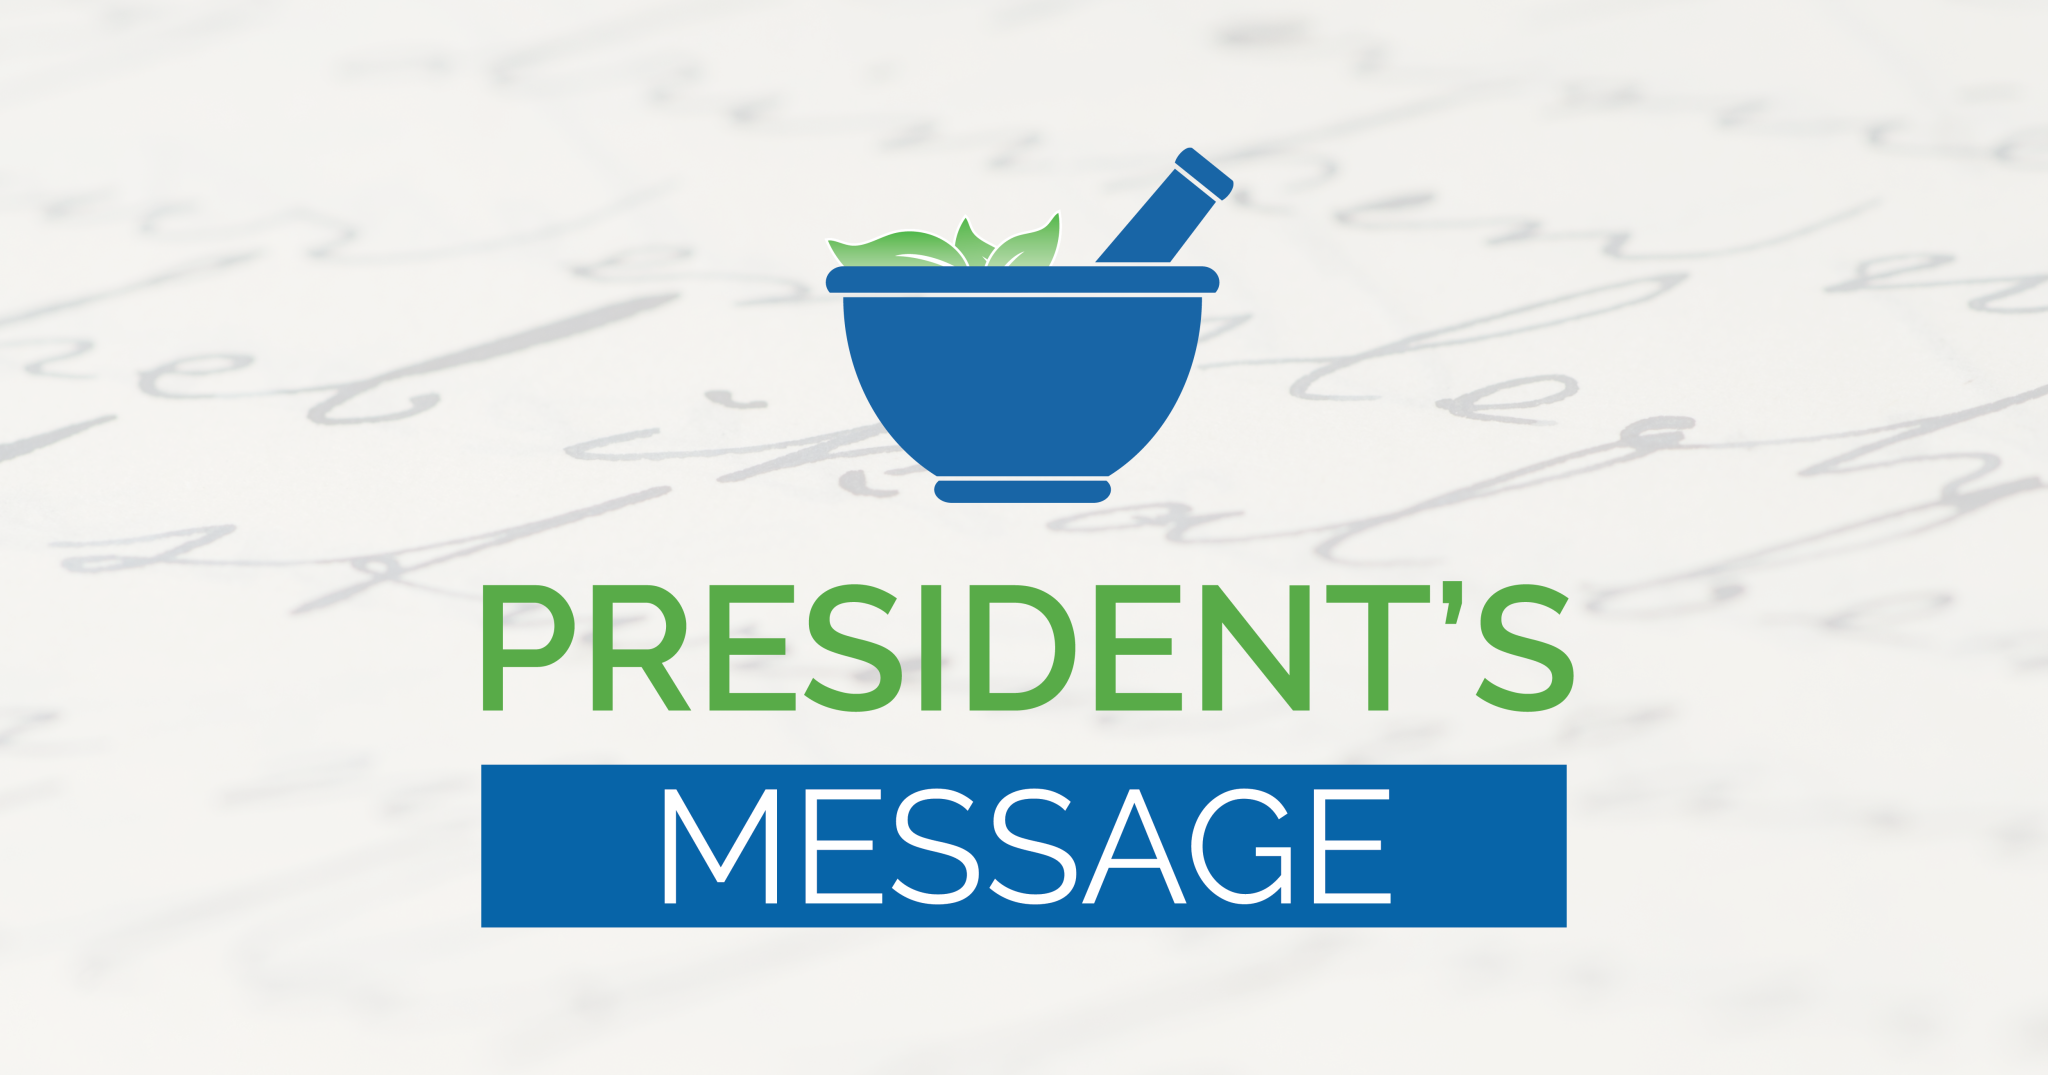 Presidents message image